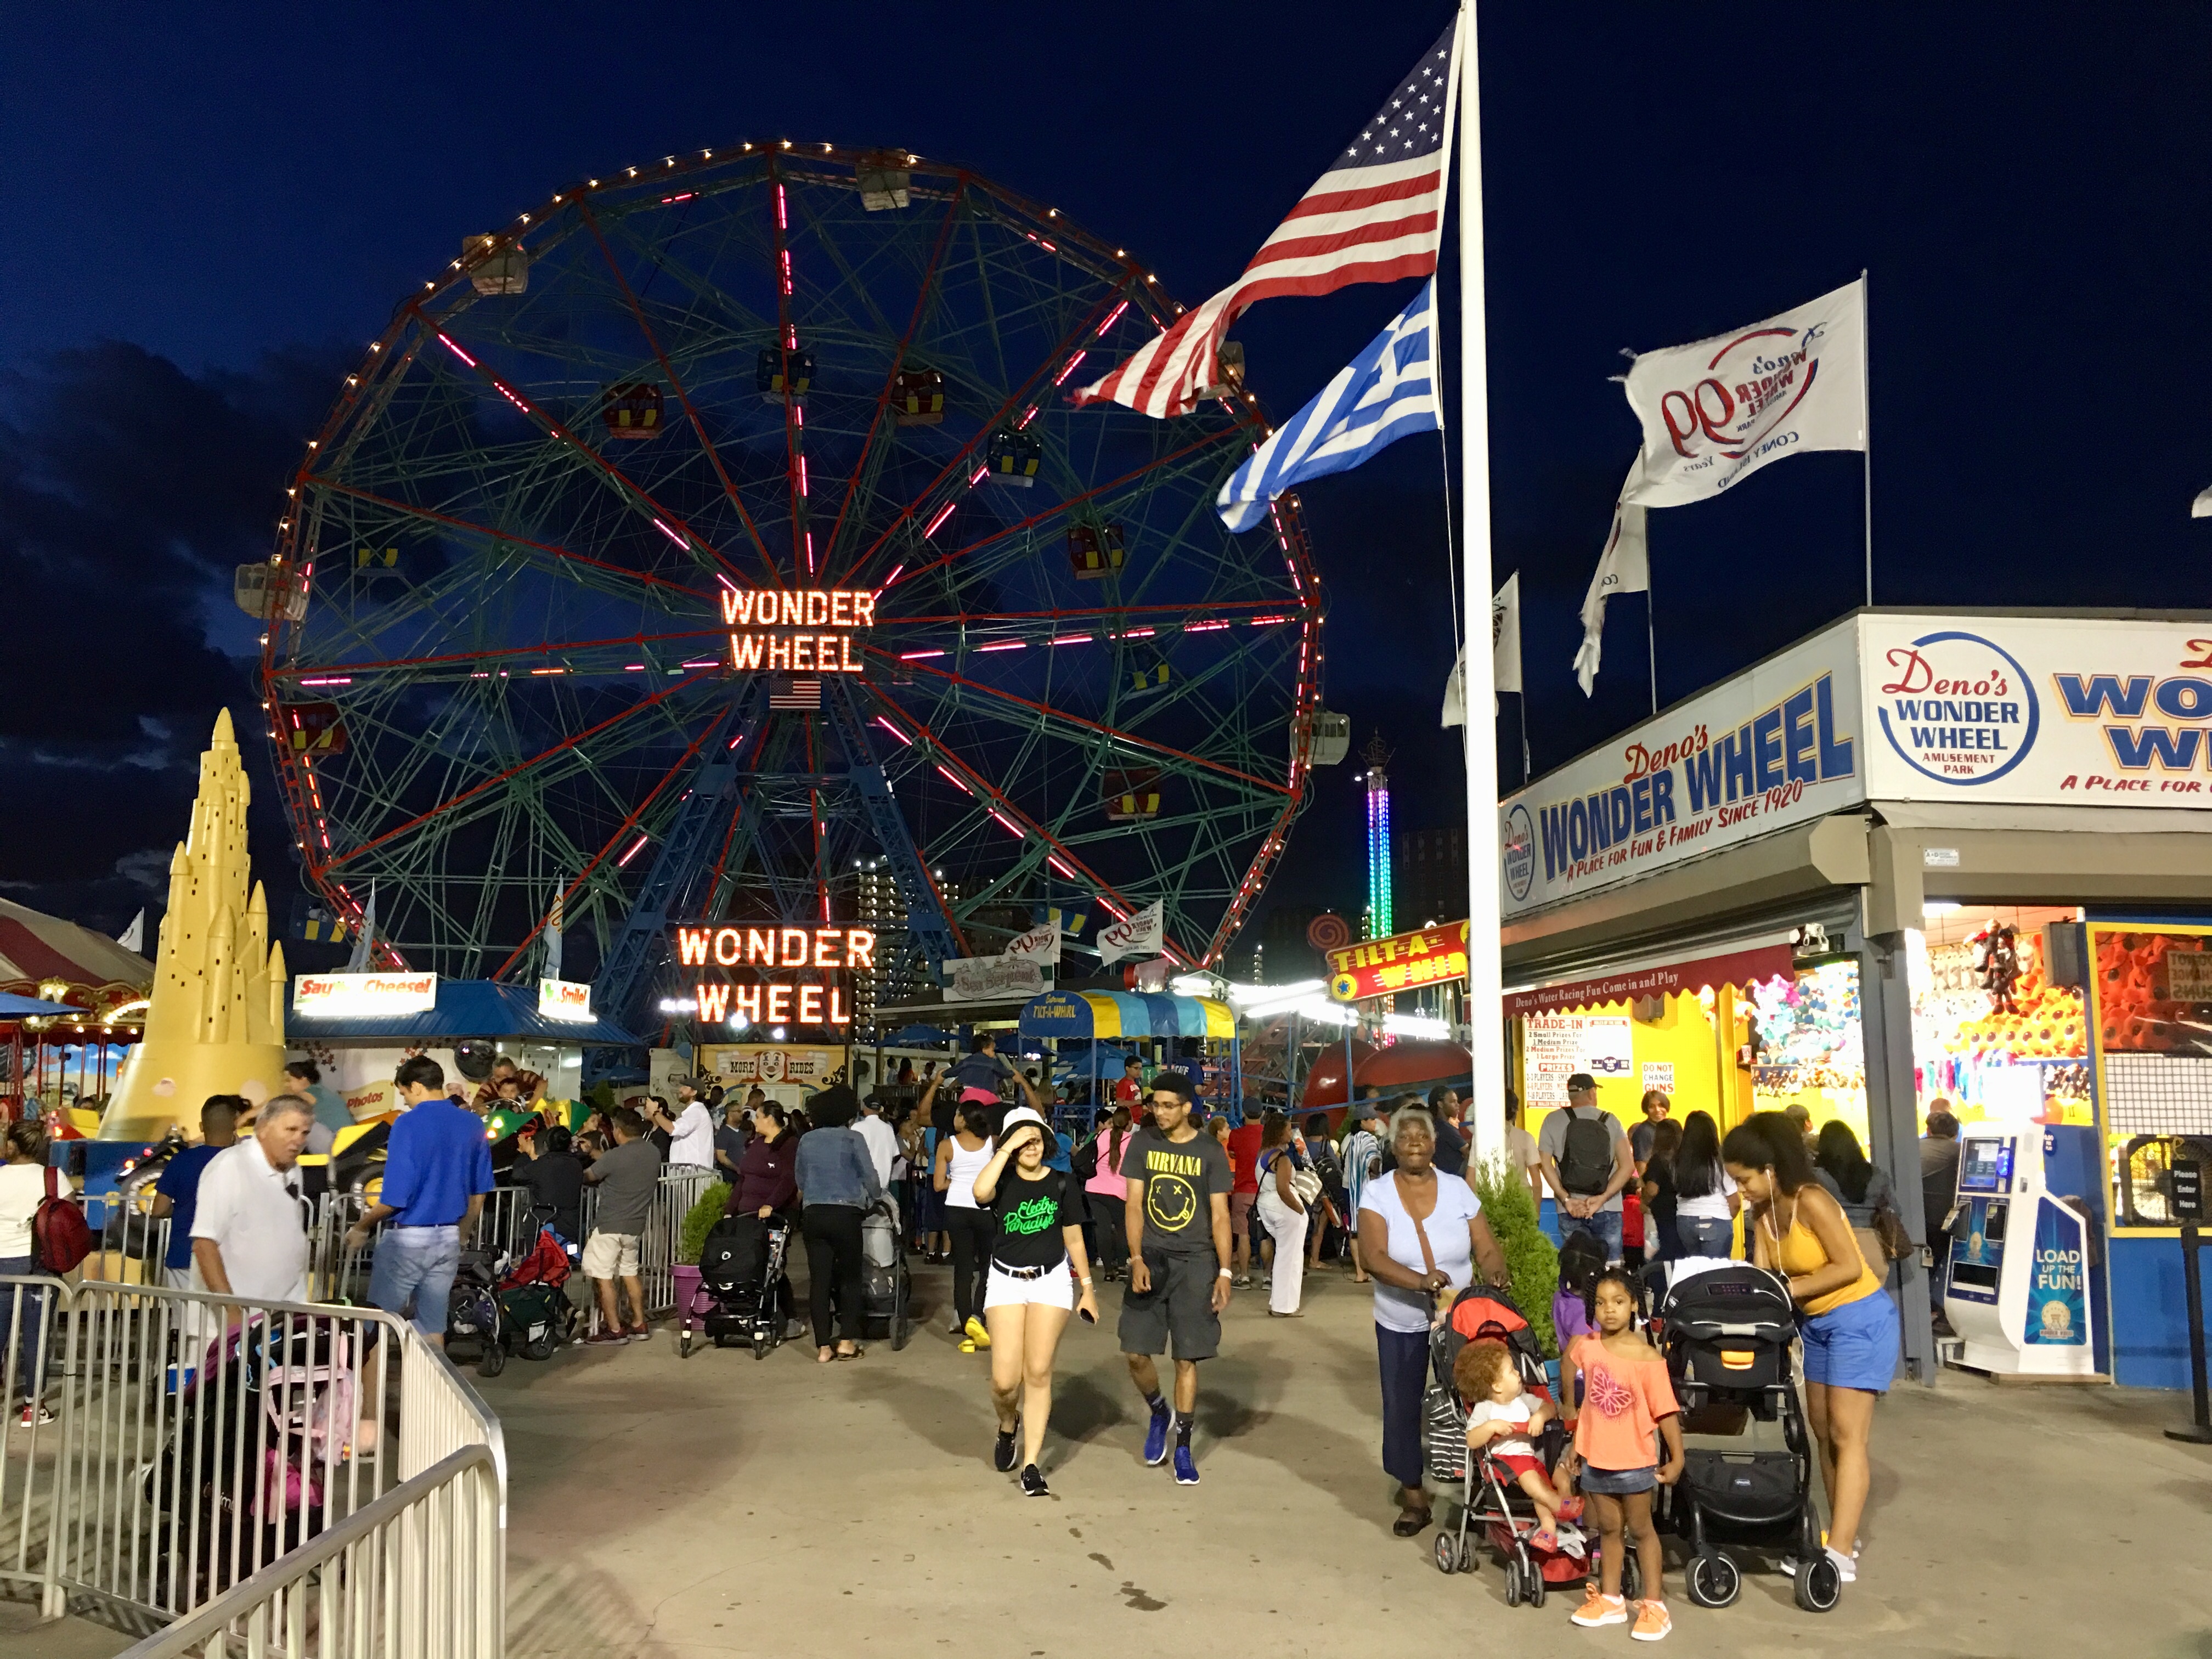 The Wonder Wheel has a distinctive look when it’s lit up at night. Eagle photo by Lore Croghan